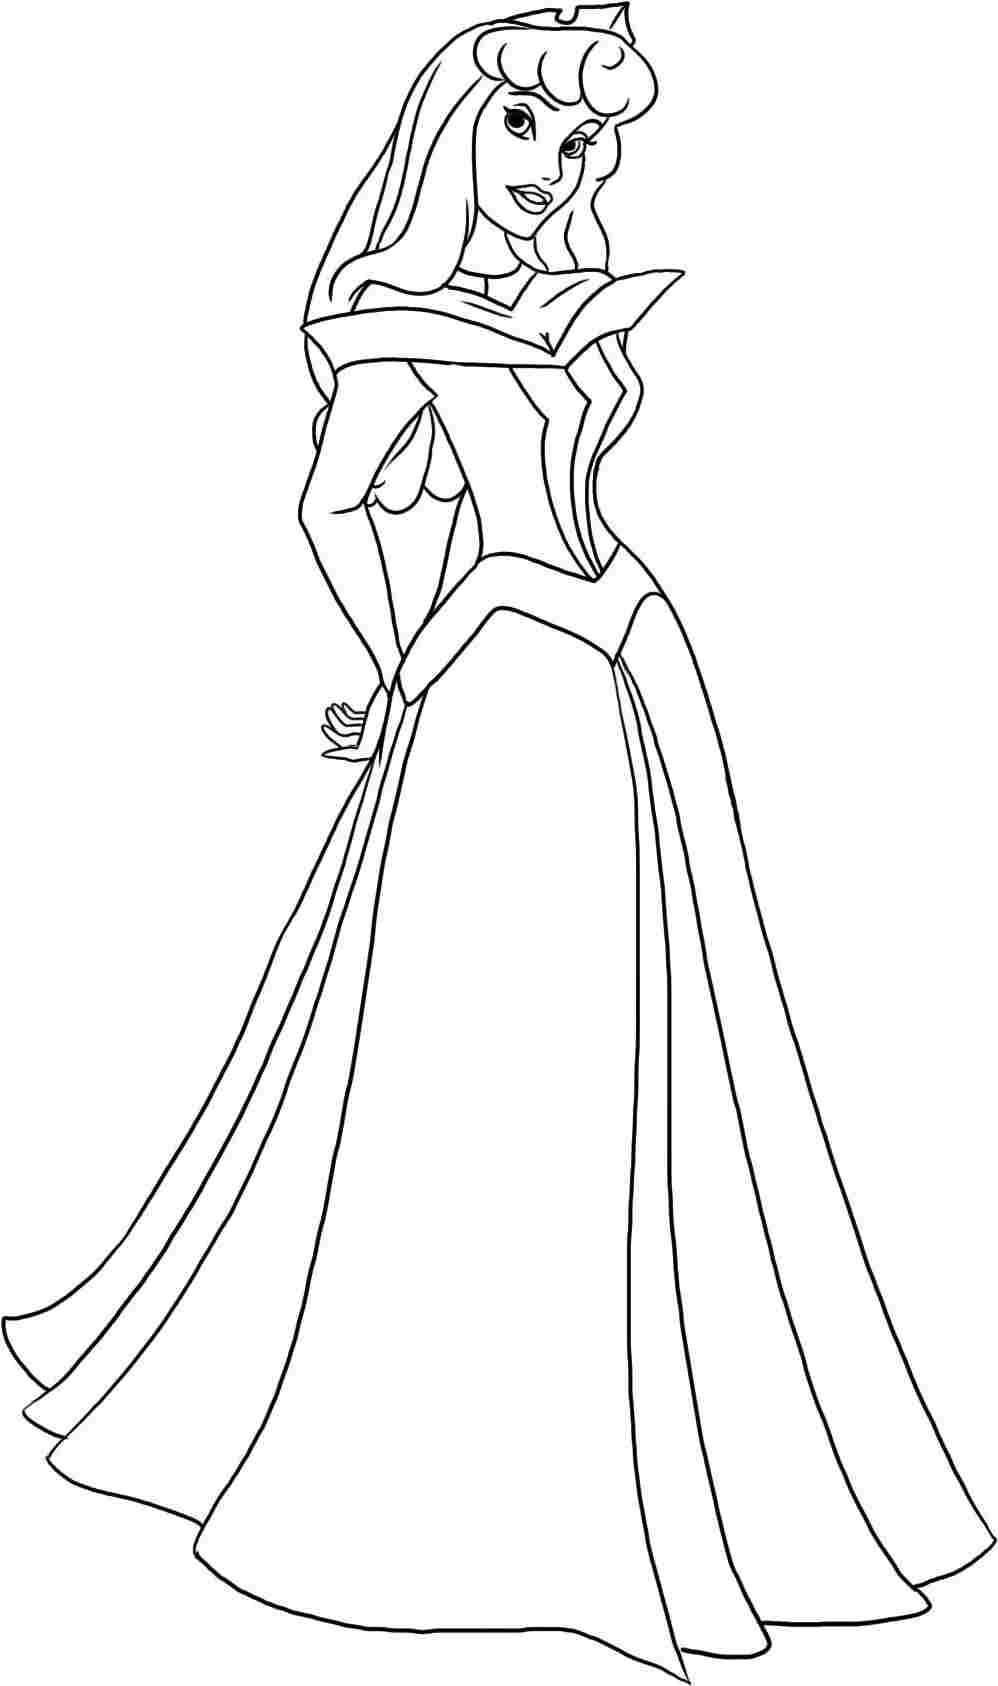 princess aurora coloring pages - High Quality Coloring Pages